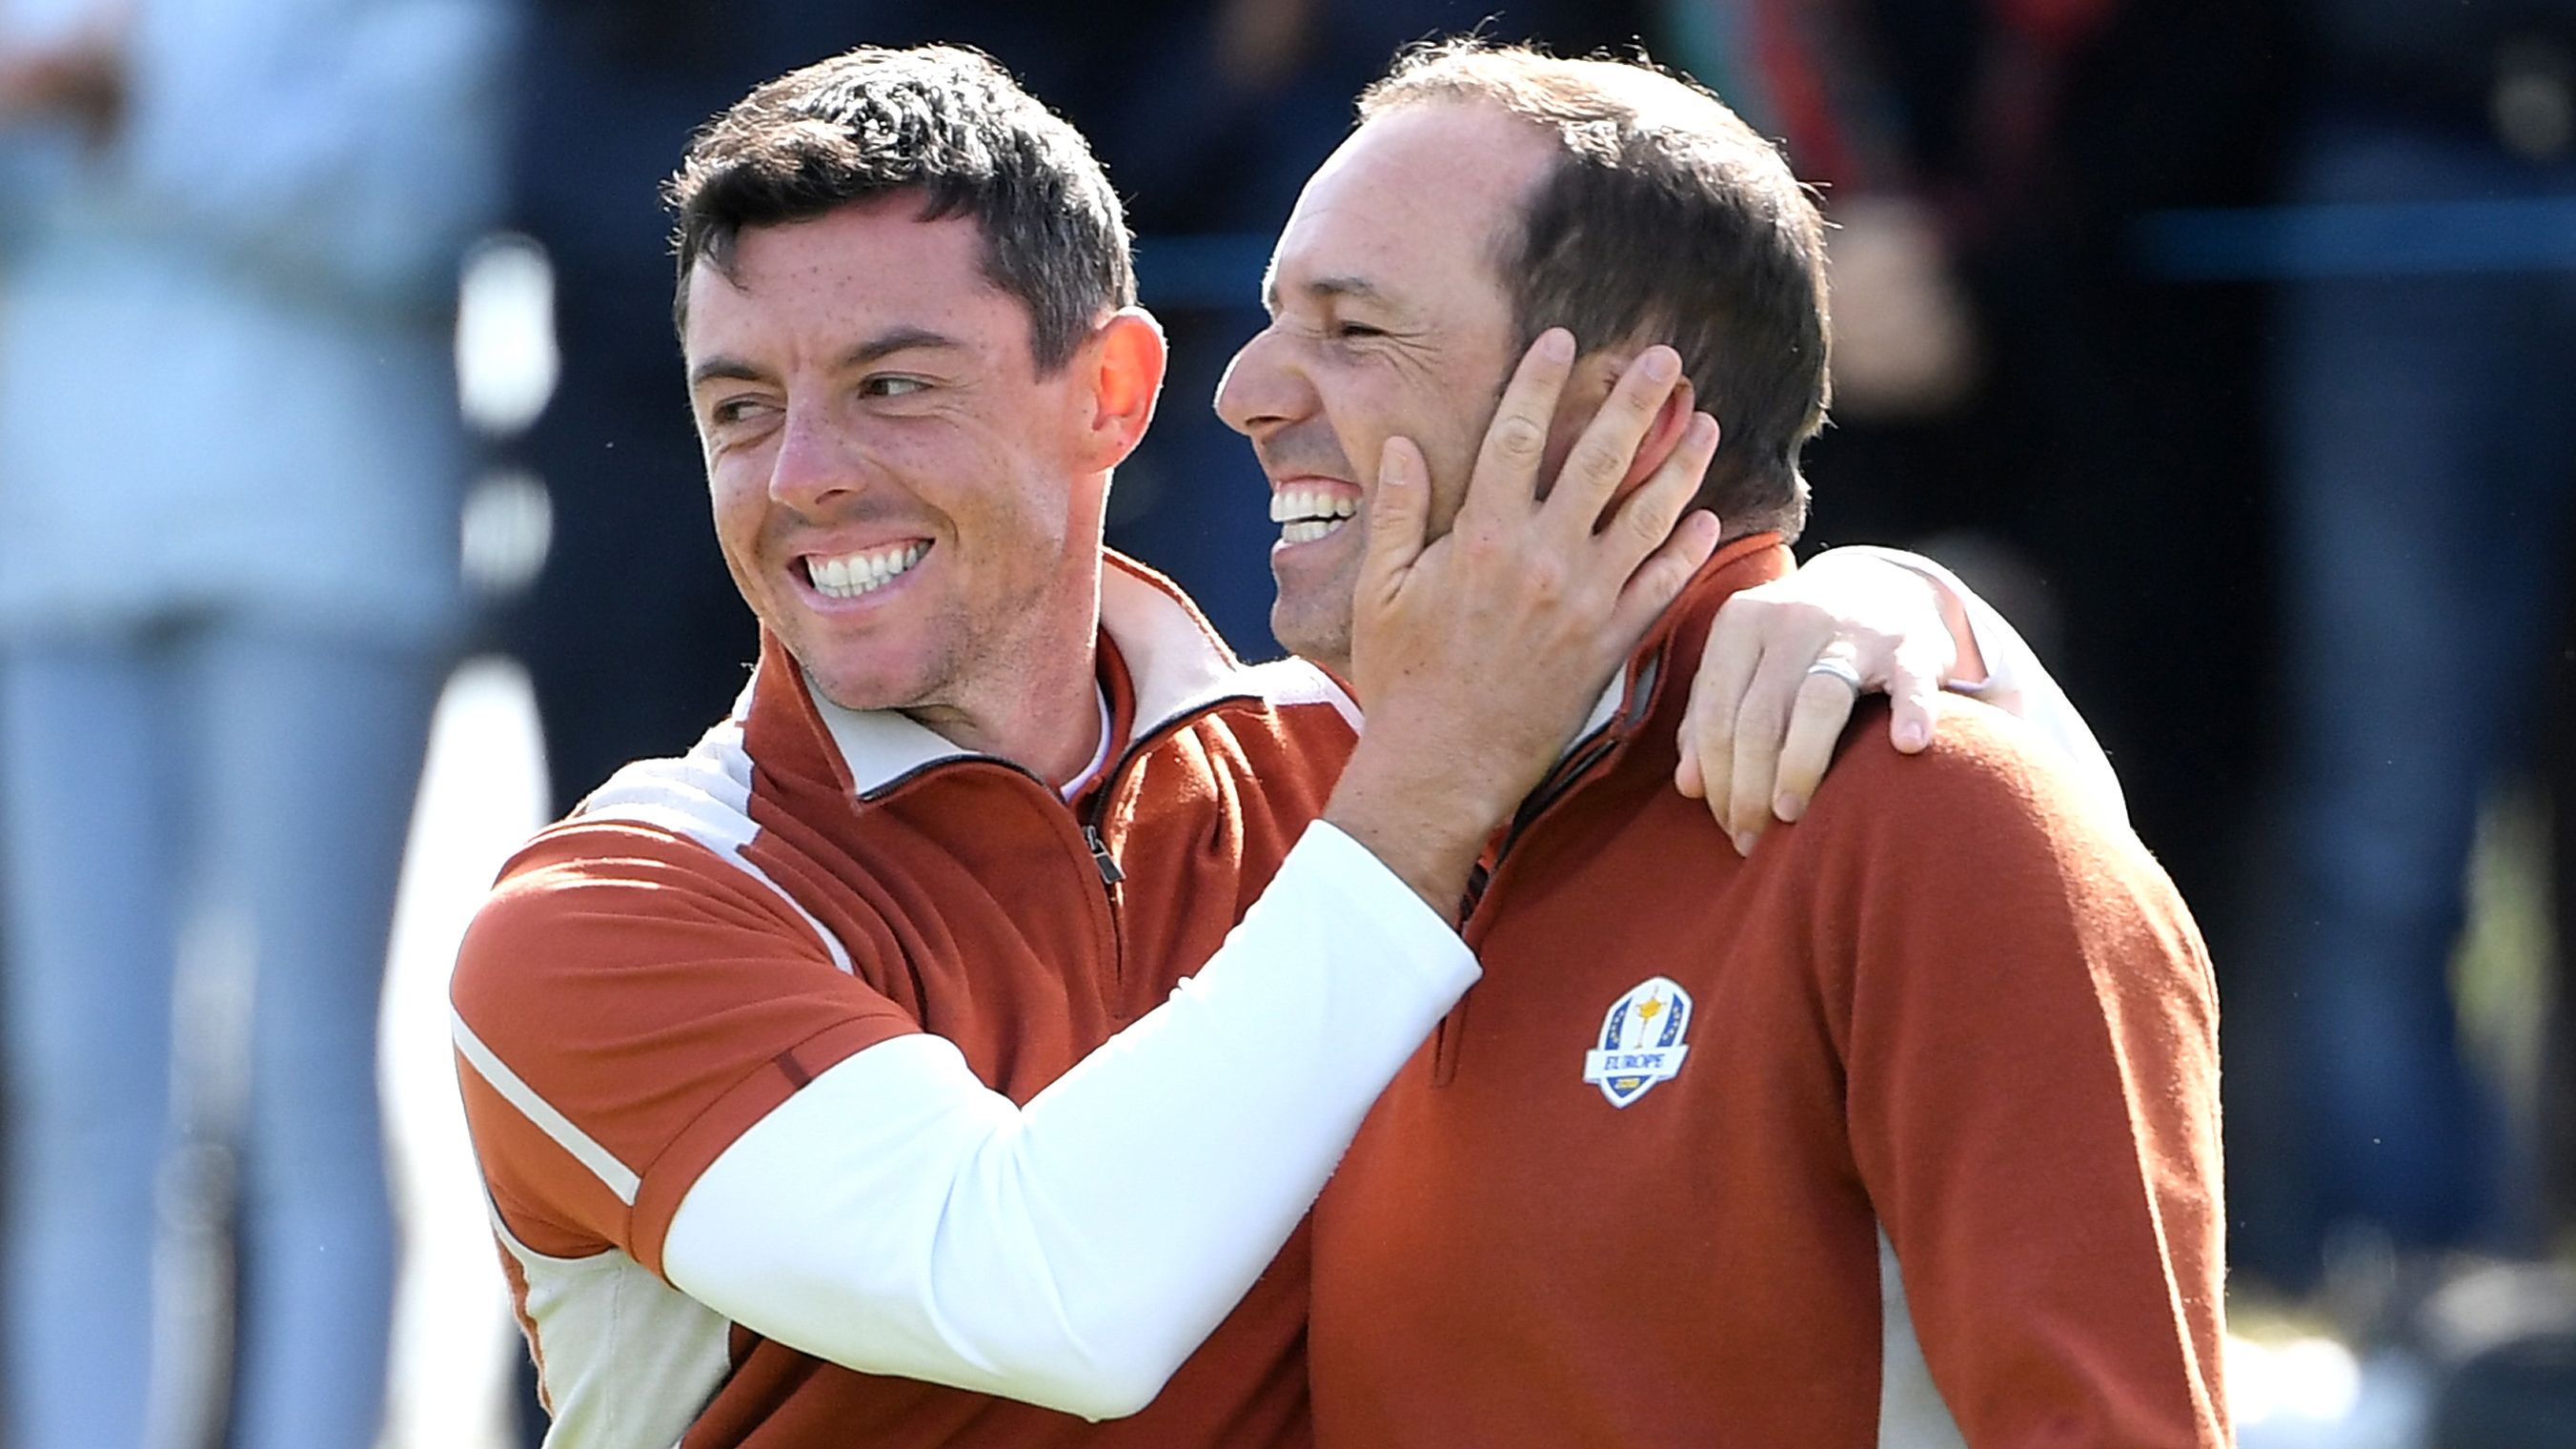 Bitter feud between Rory McIlroy and Sergio Garcia over after US Open truce